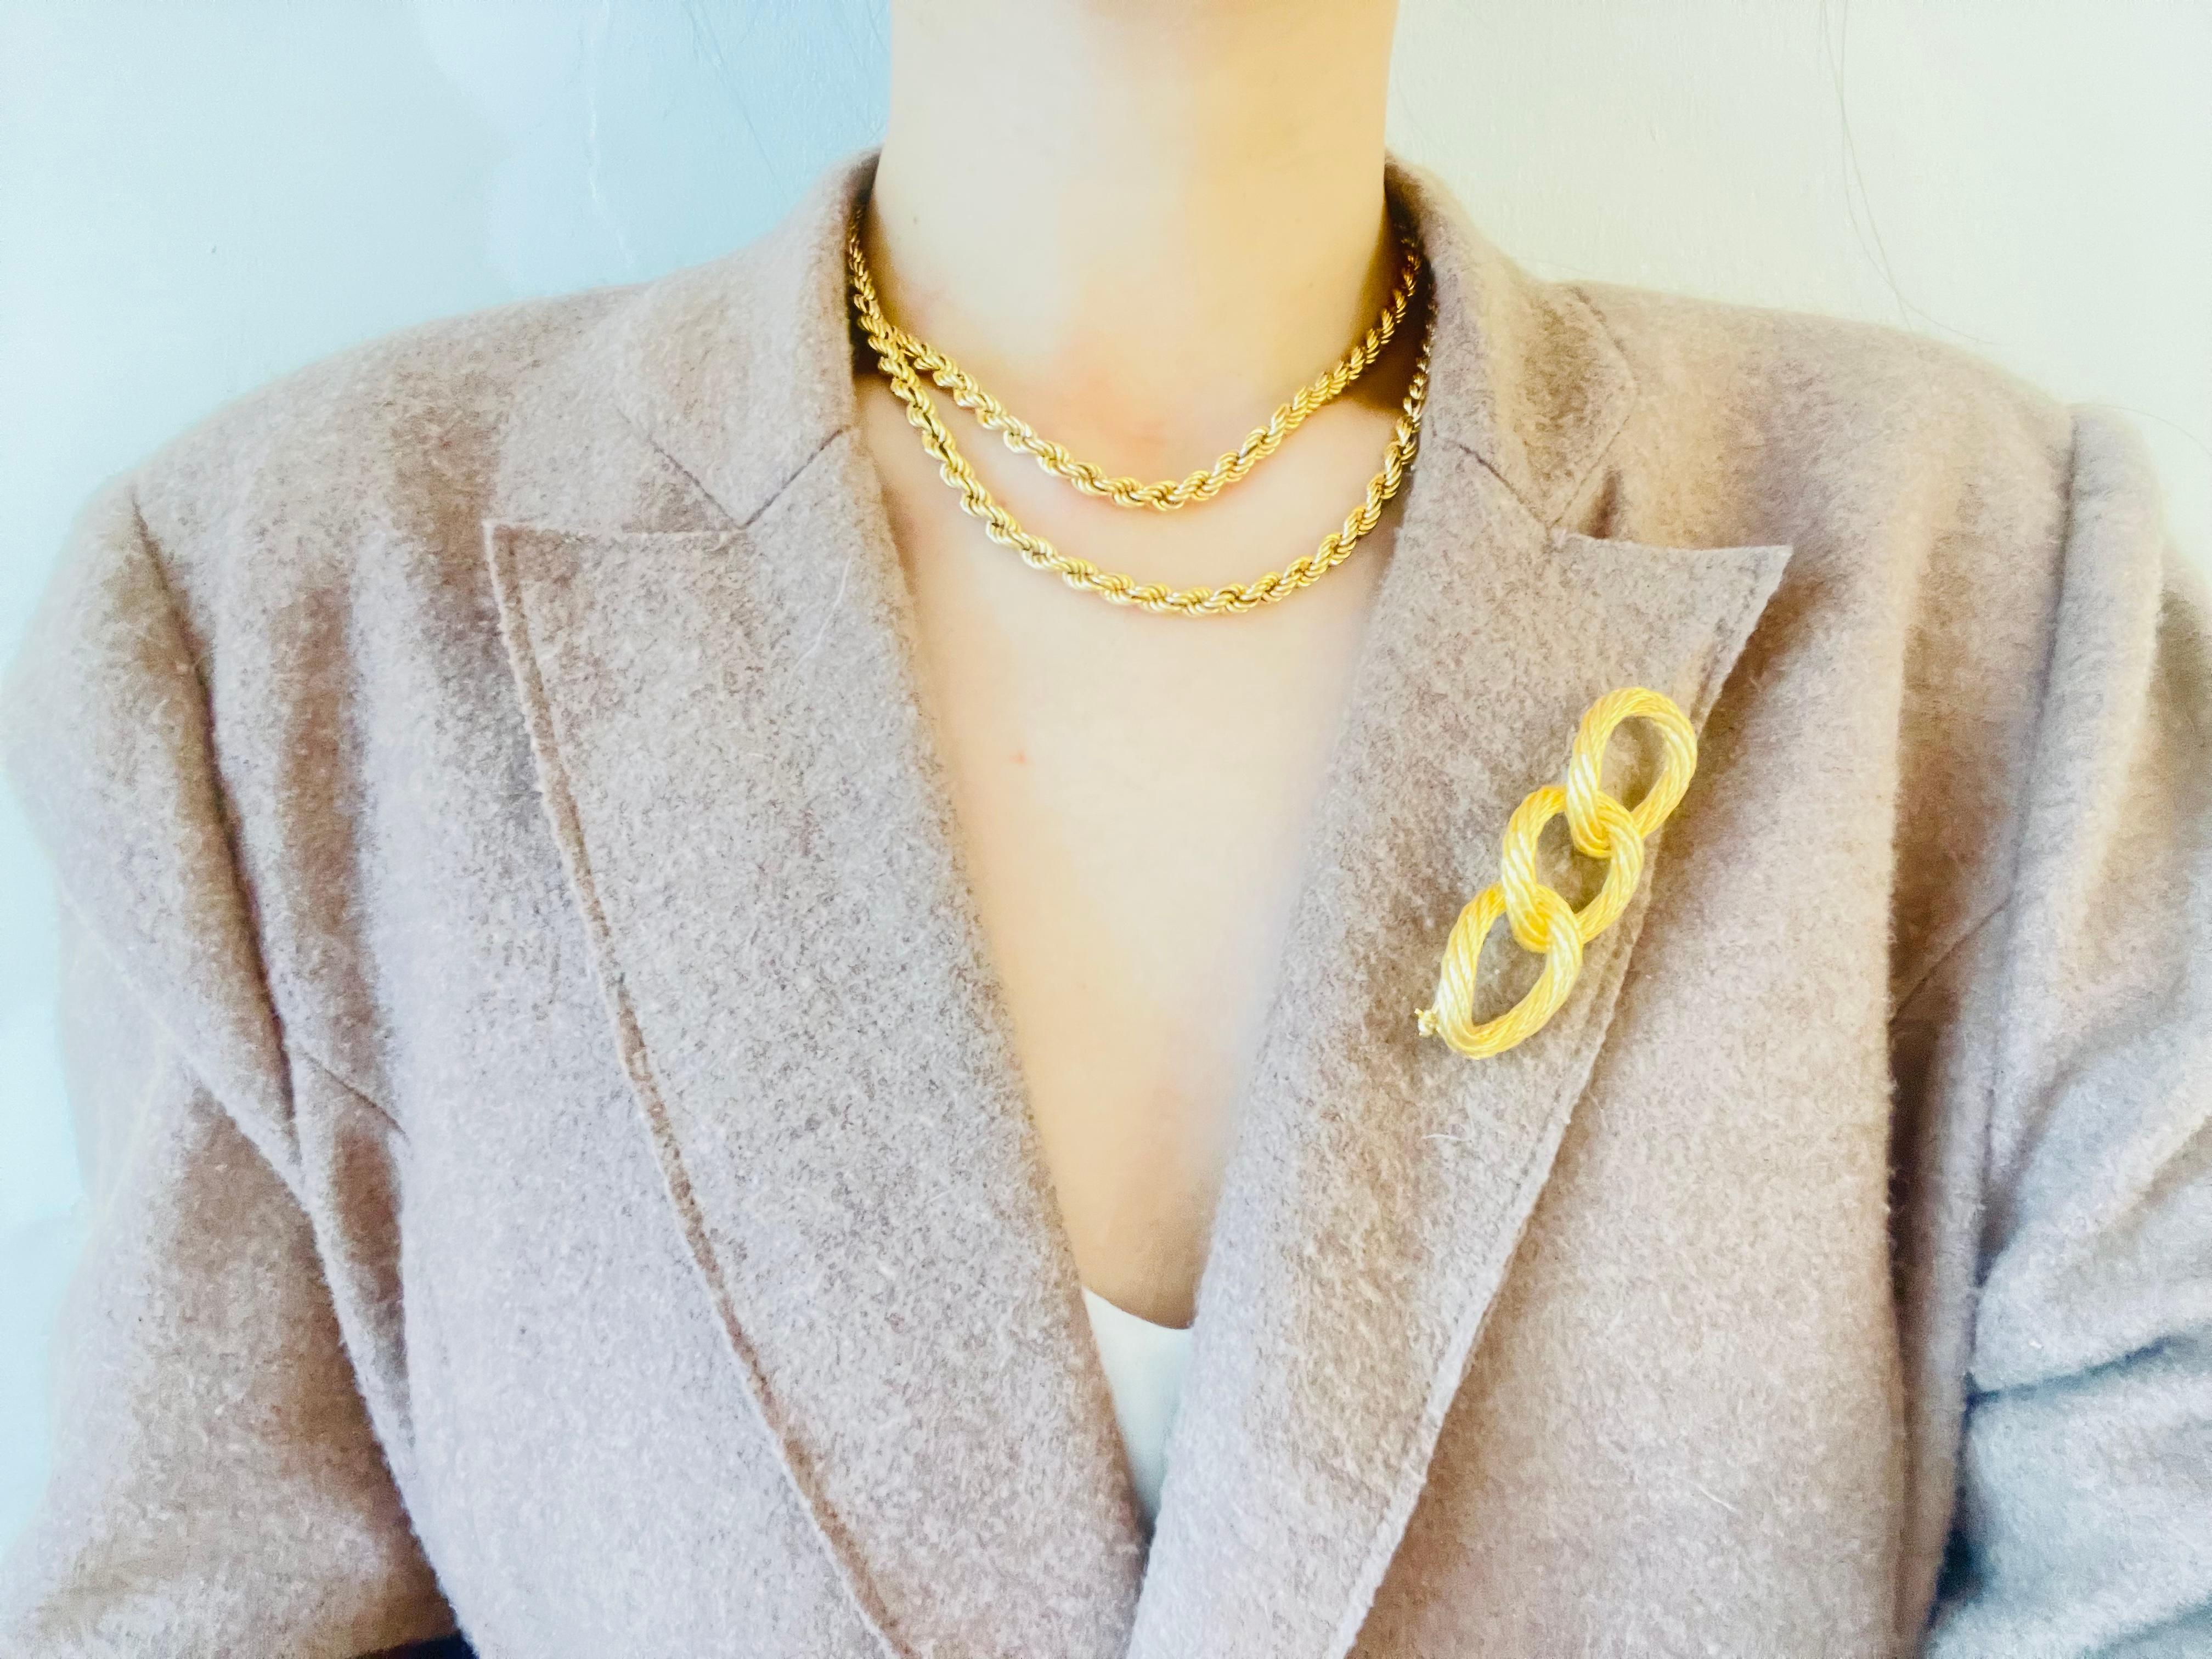 Christian Dior Vintage 1980s Versatile Twist Rope Chain Gold Long Necklace For Sale 3